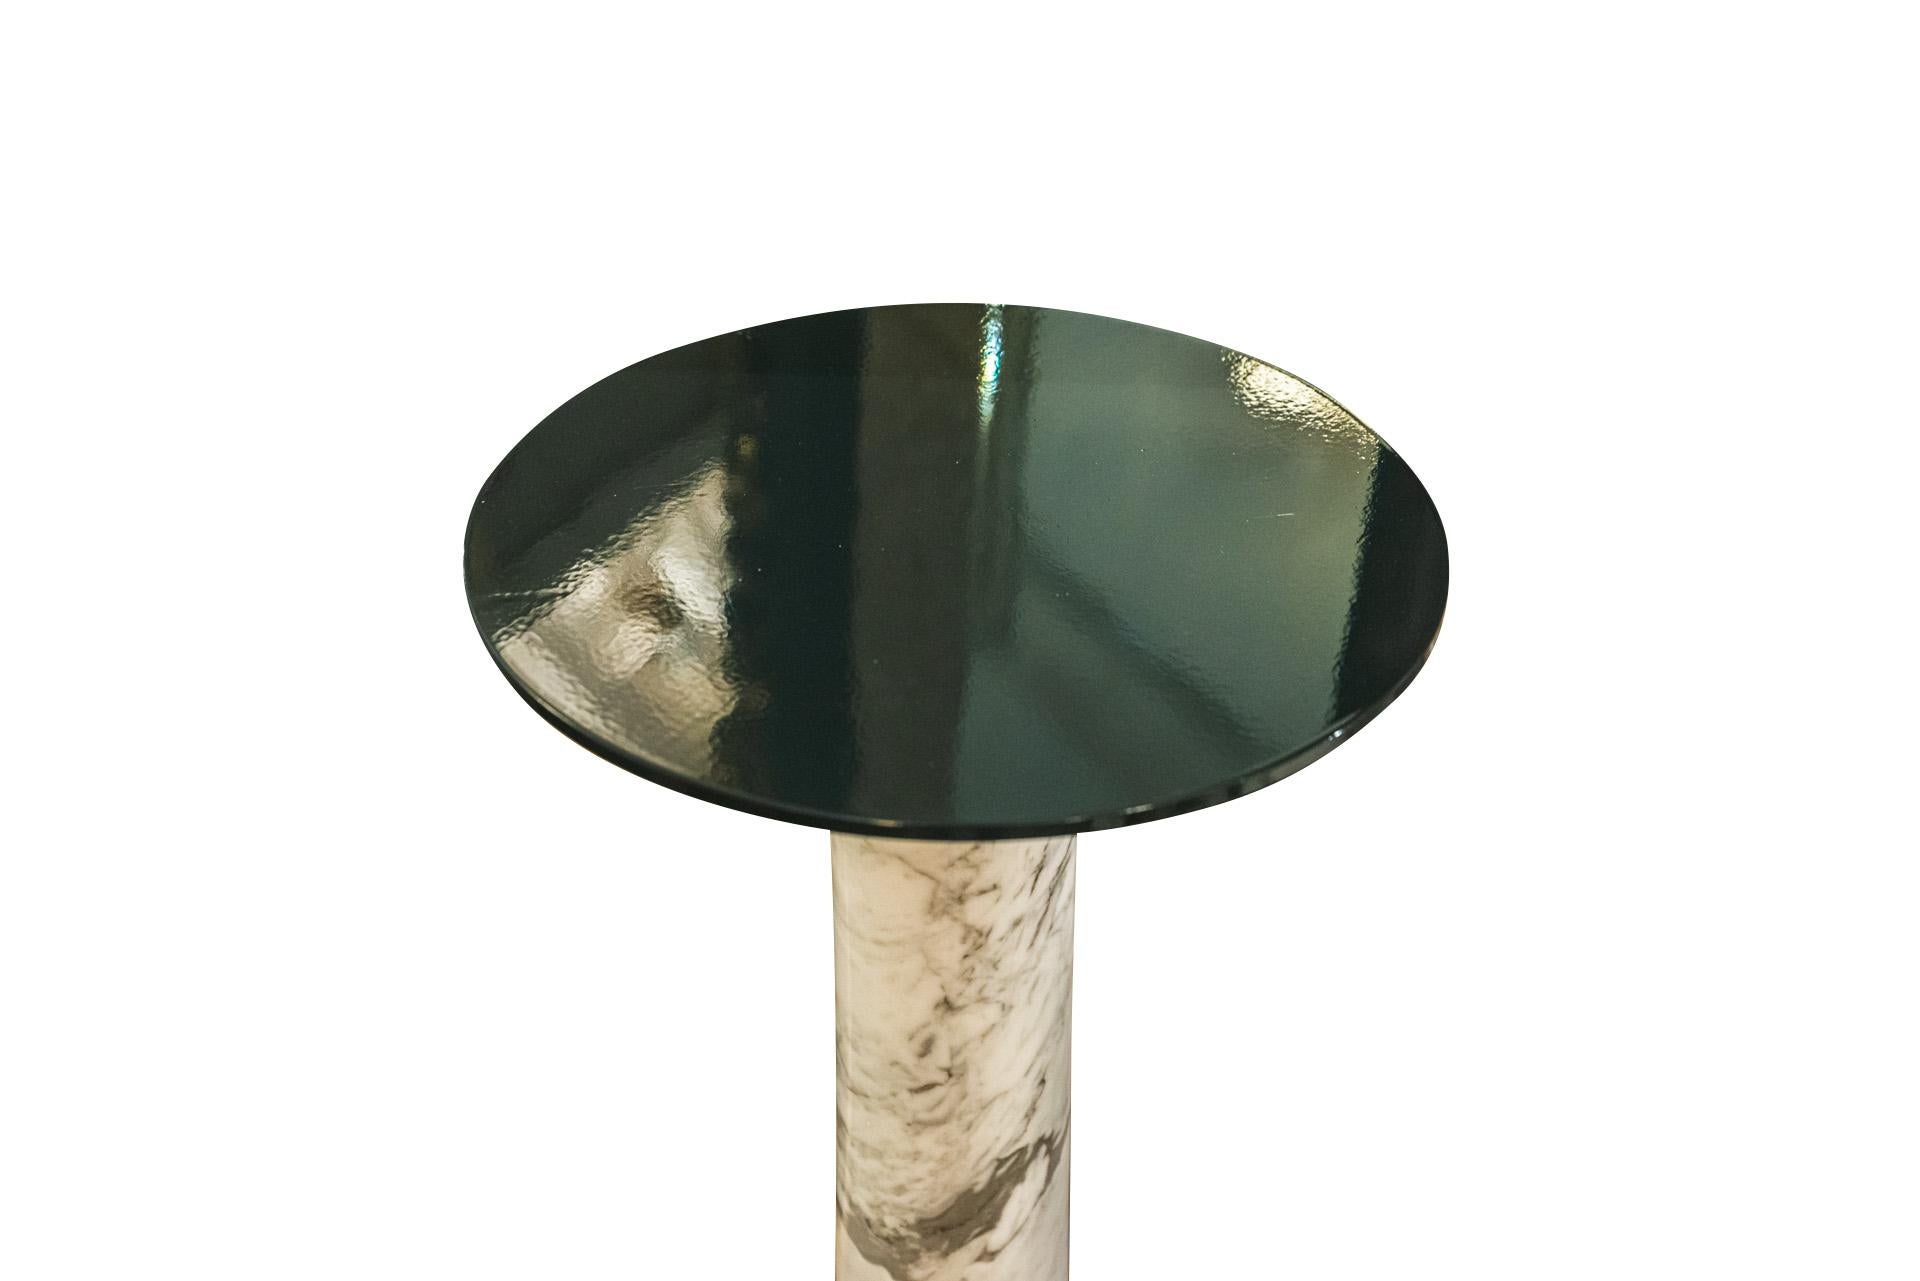 Angelo Mangiarotti (1921-2012) for Skipper, pedestal table, Model Attesa,
Tapered white marble base,
Round lacquered steel top,
circa 1988, Italy. 

Measures : height 111 cm, diameter 30 cm.

Angelo Mangiarotti (1921-2012) is an Italian